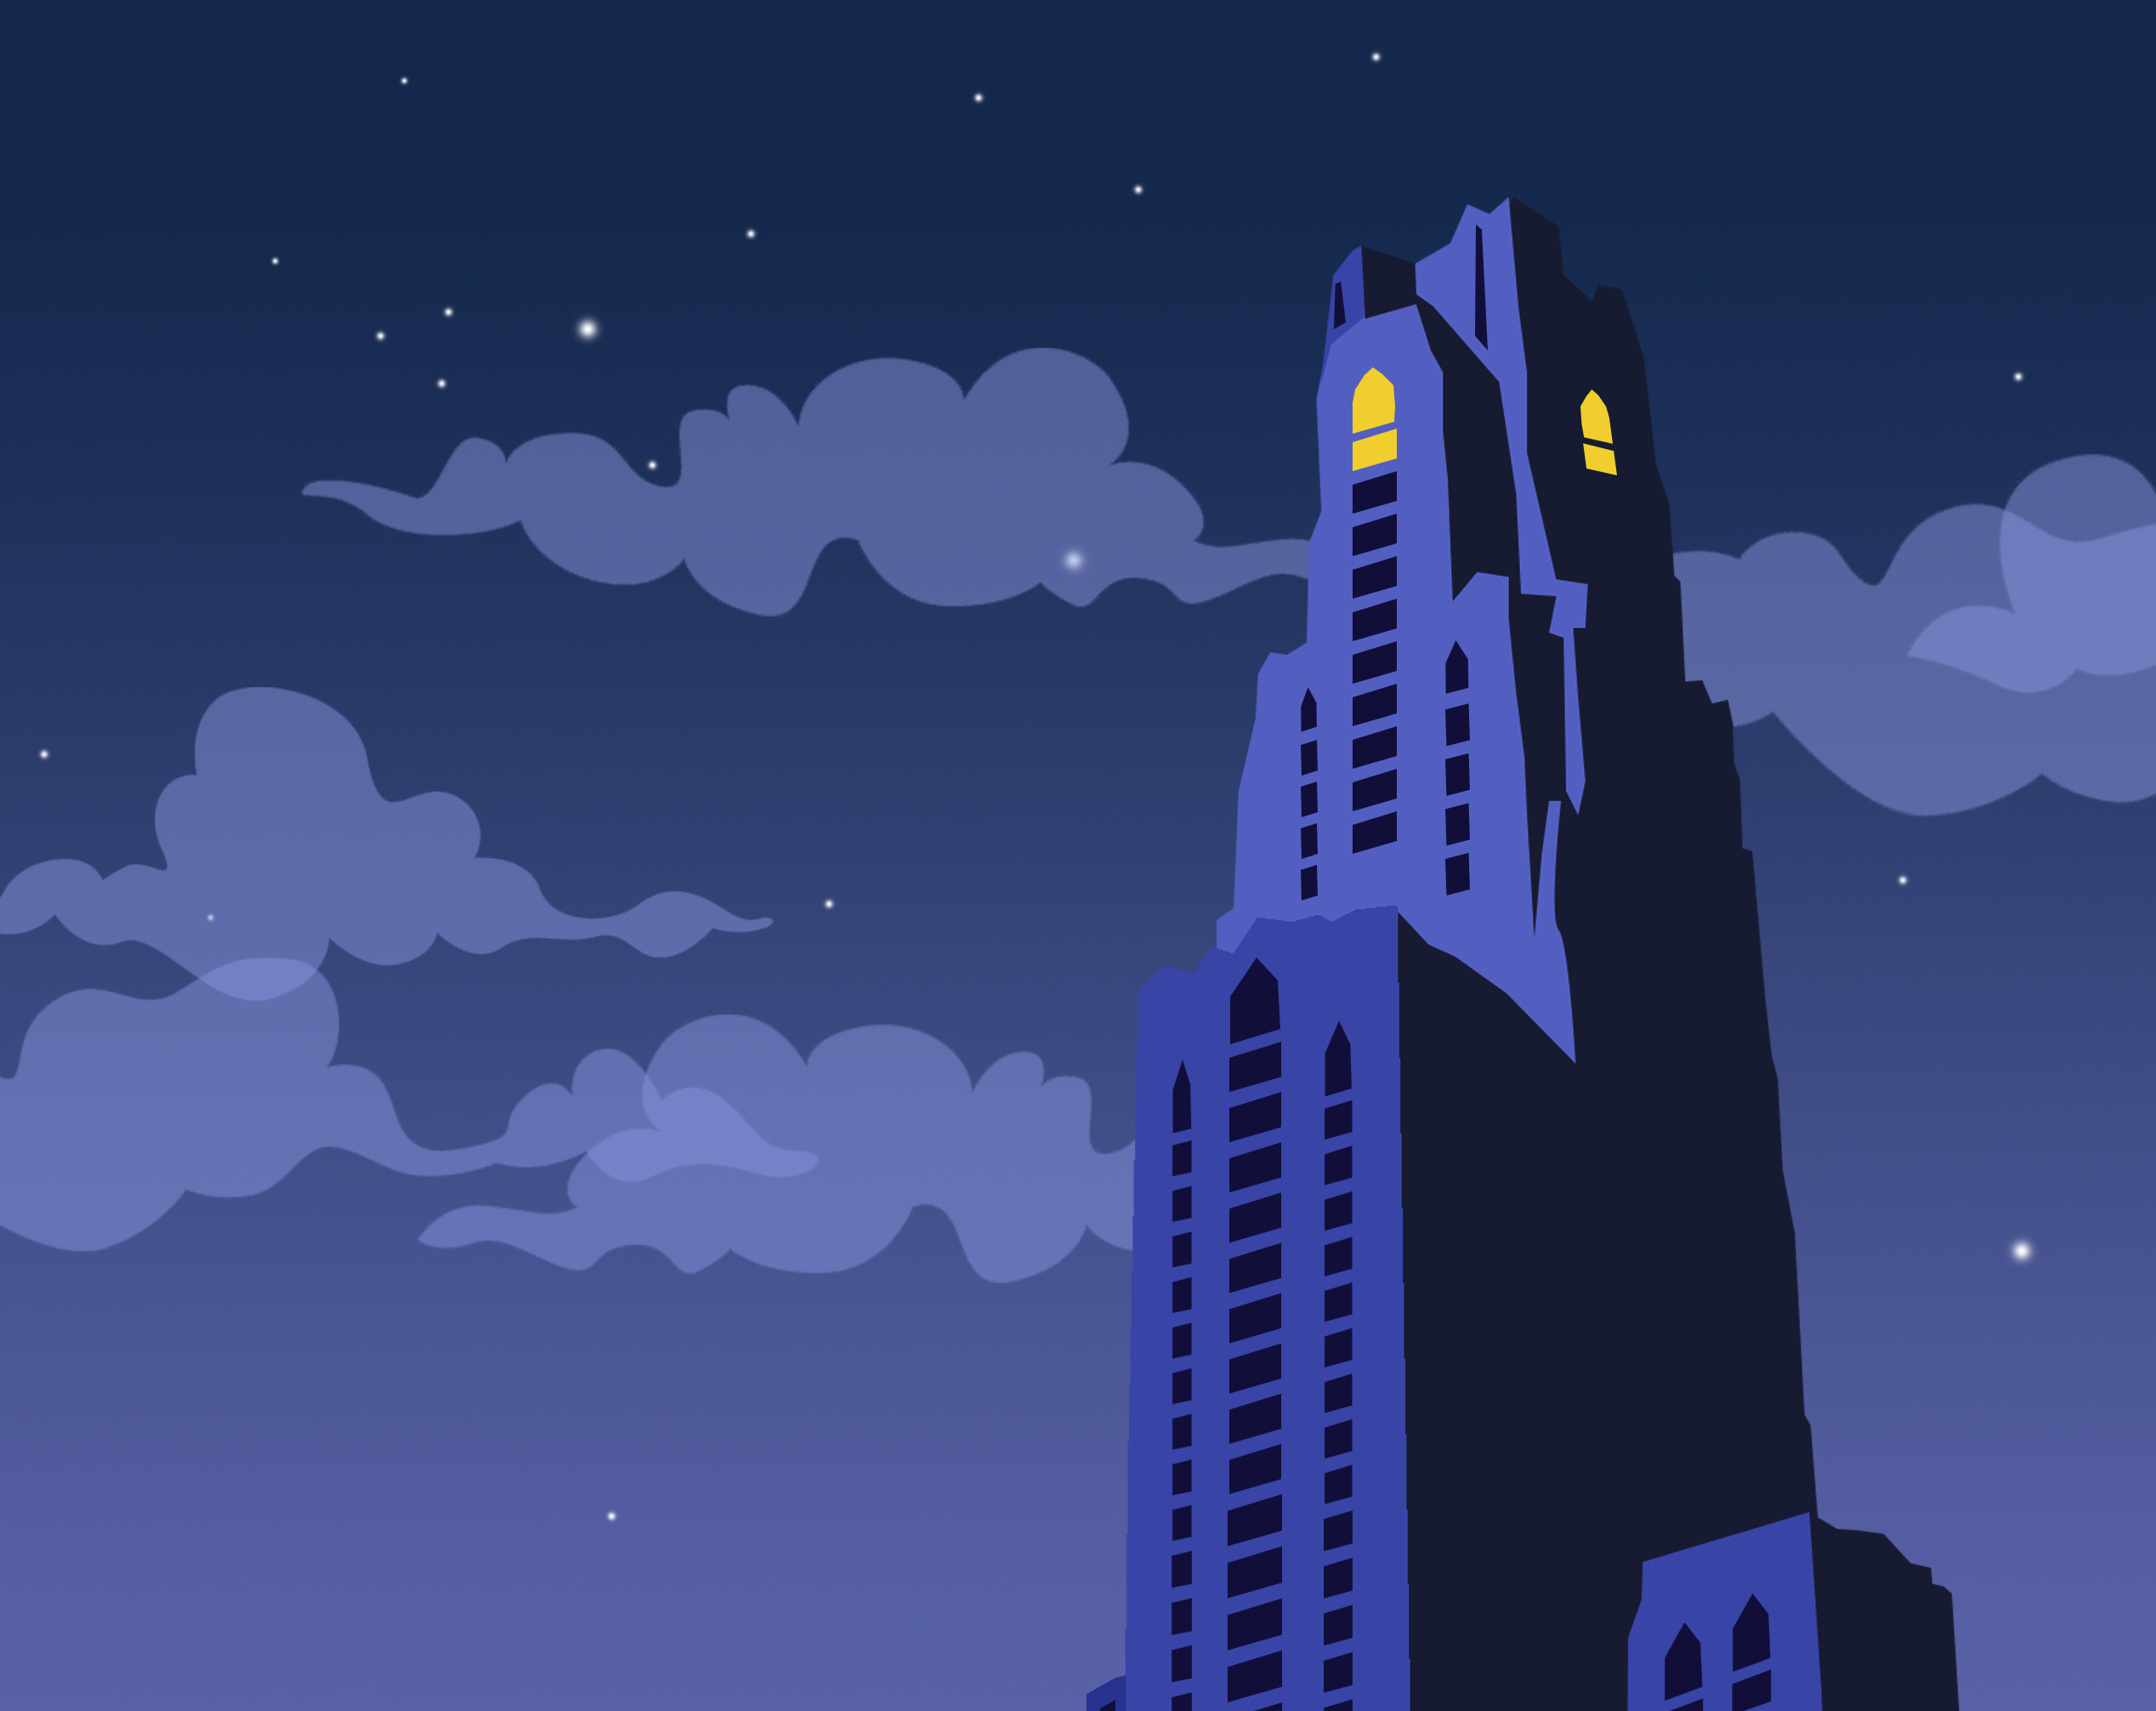 Illustration of the Cathedral of Learning against a night sky. Issue 1 Cover Design.